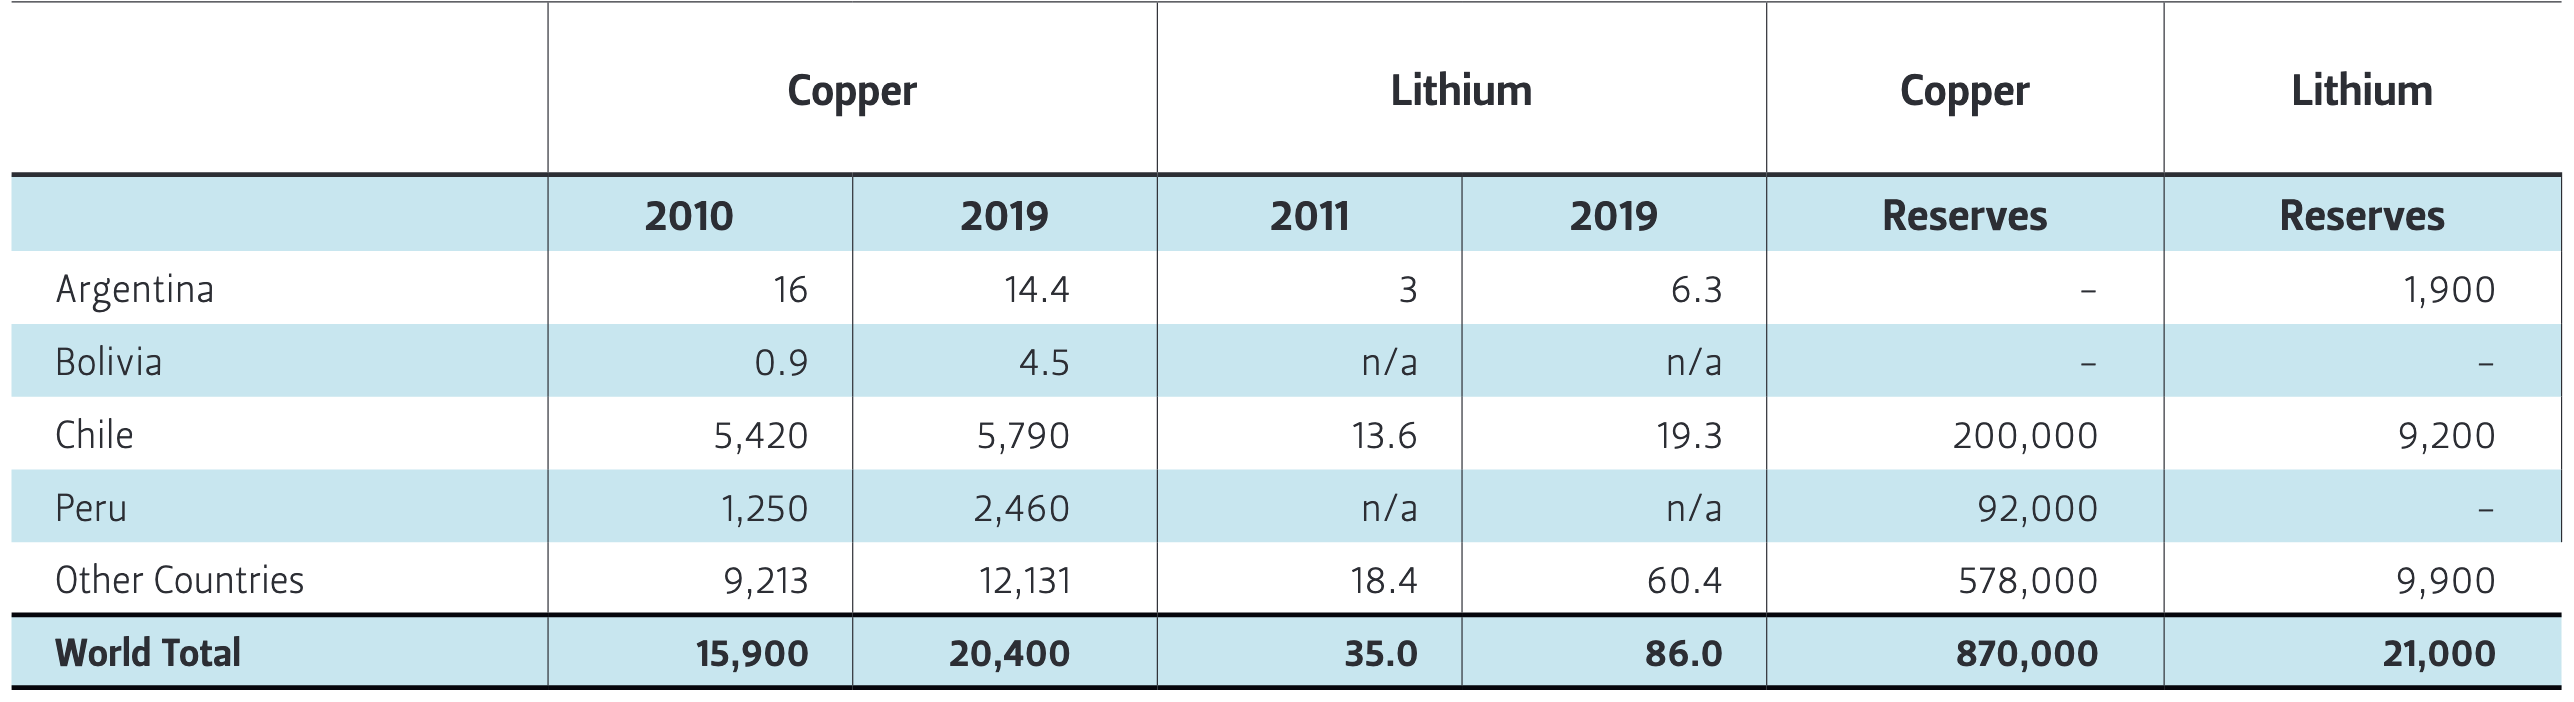 Table 1 — Production & Reserves: Copper and Lithium in Selected Countries (in '000 Metric Tons)